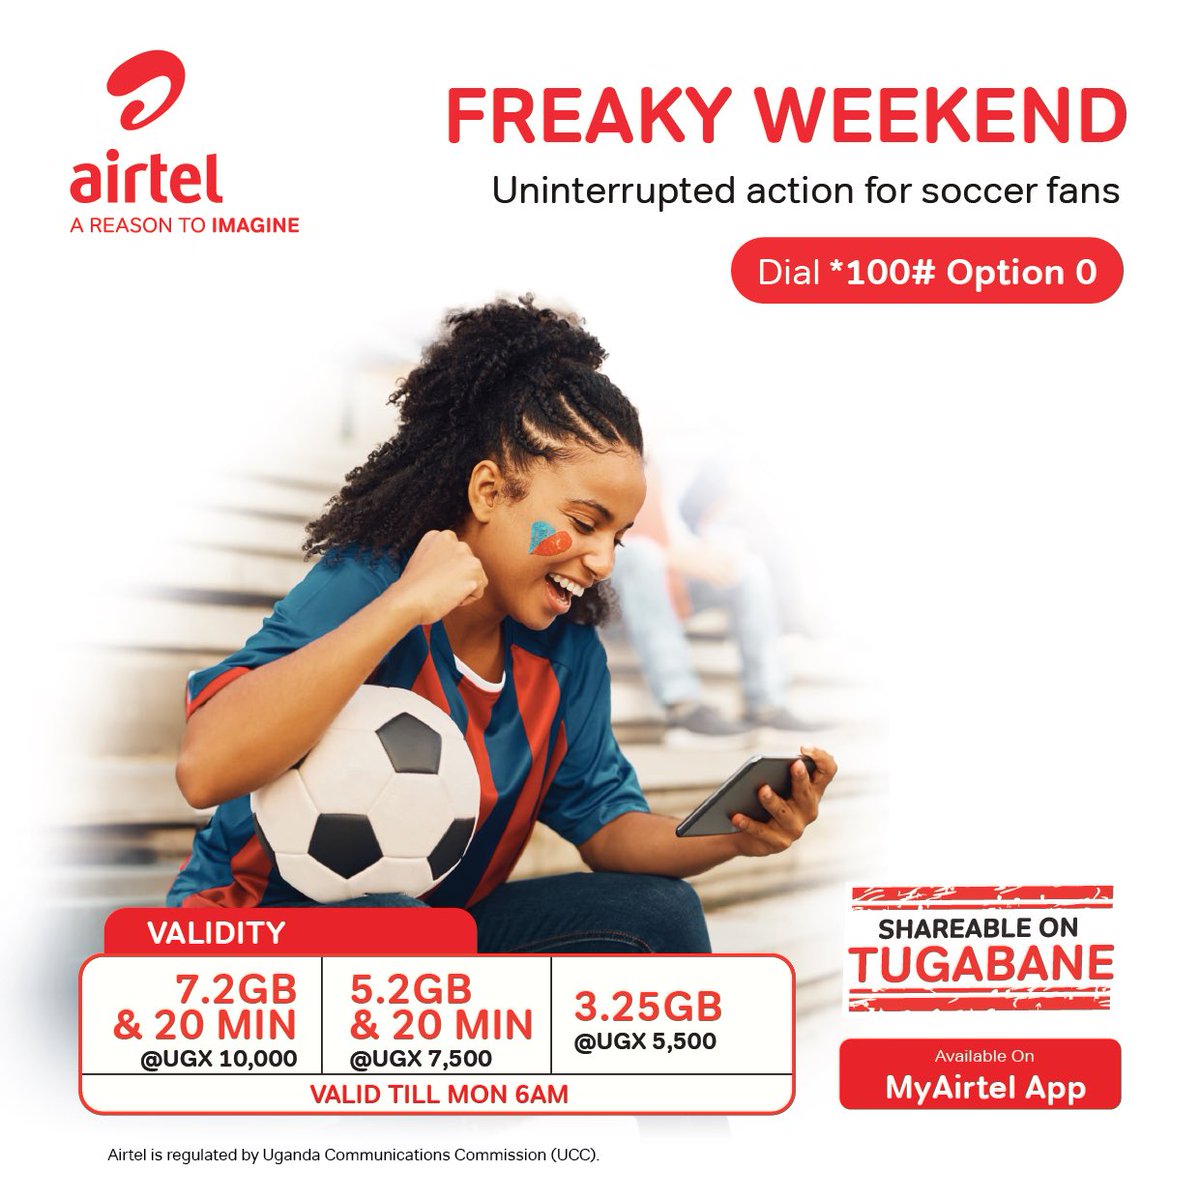 Get in on the non-stop soccer action with #FreakyWeekend bundles Dial *100# or use #MyAirtelApp airtelafrica.onelink.me/cGyr/qgj4qeu2 for uninterrupted fun!